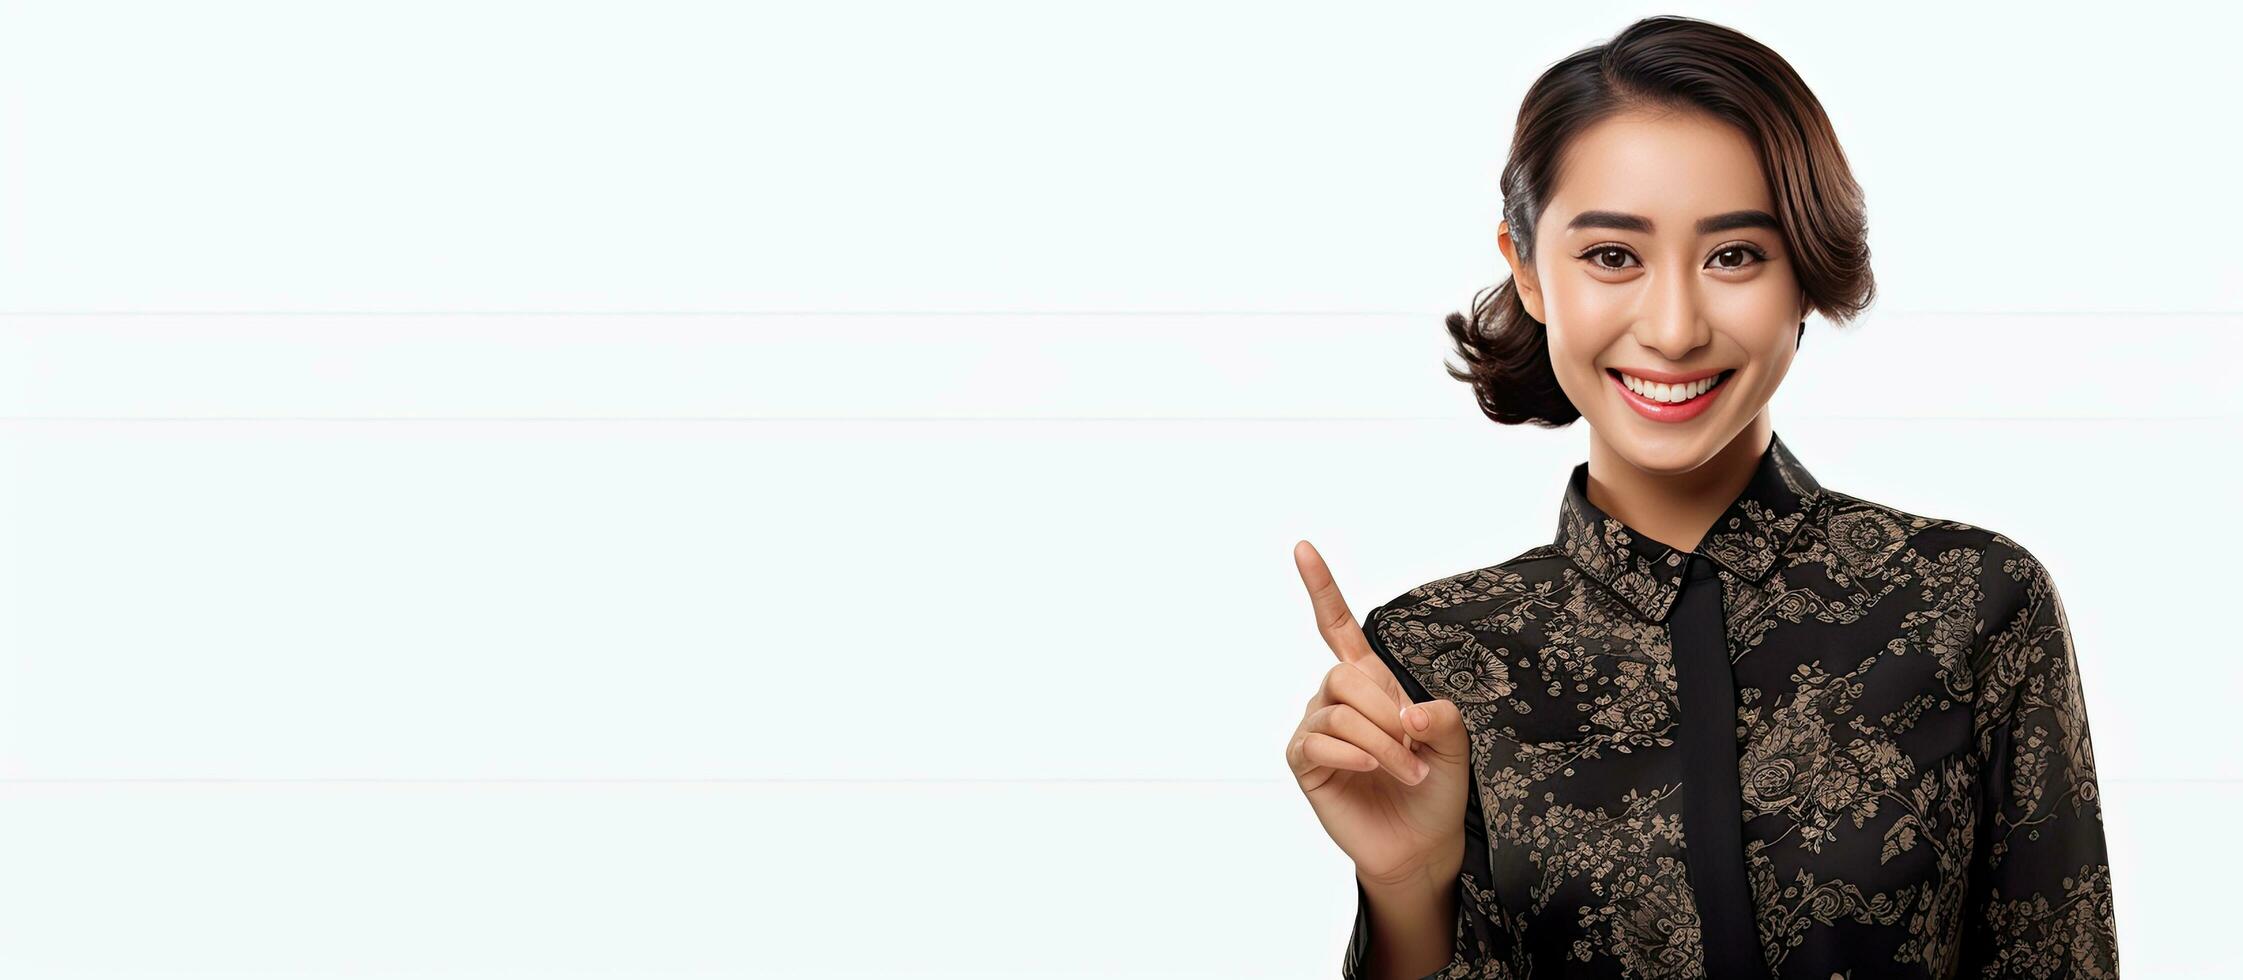 Content Indonesian or Asian woman in black batik clothing gestures upwards smiling and pleased with product on a white backdrop photo